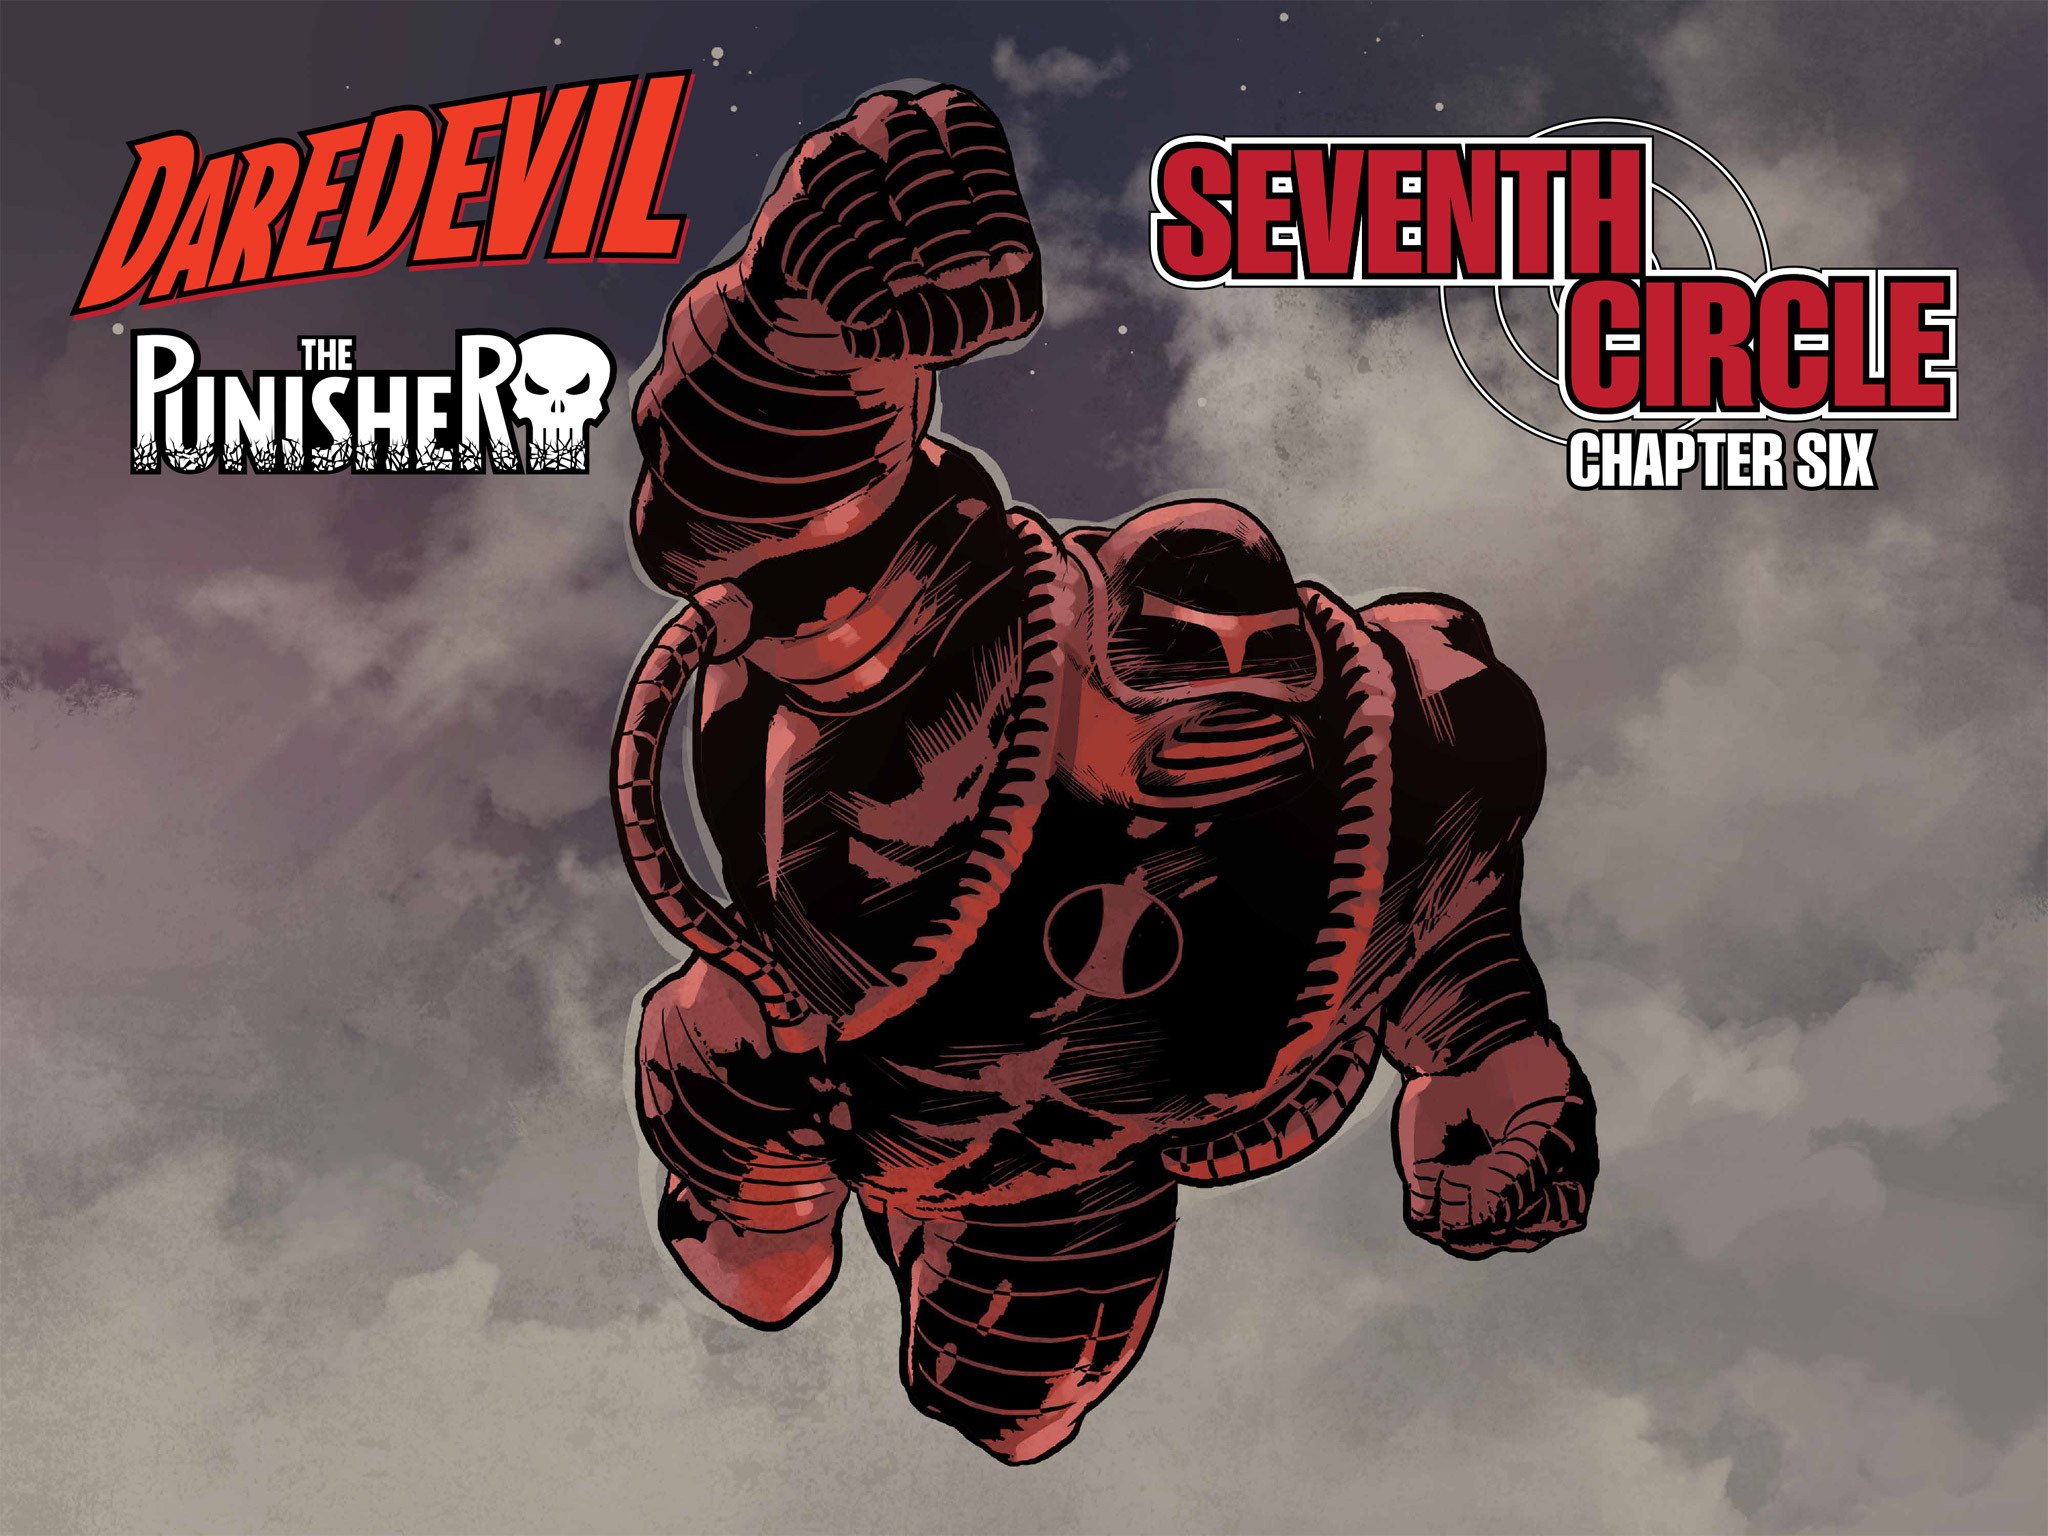 Read online Daredevil / Punisher : The Seventh Circle comic -  Issue #6 - 23